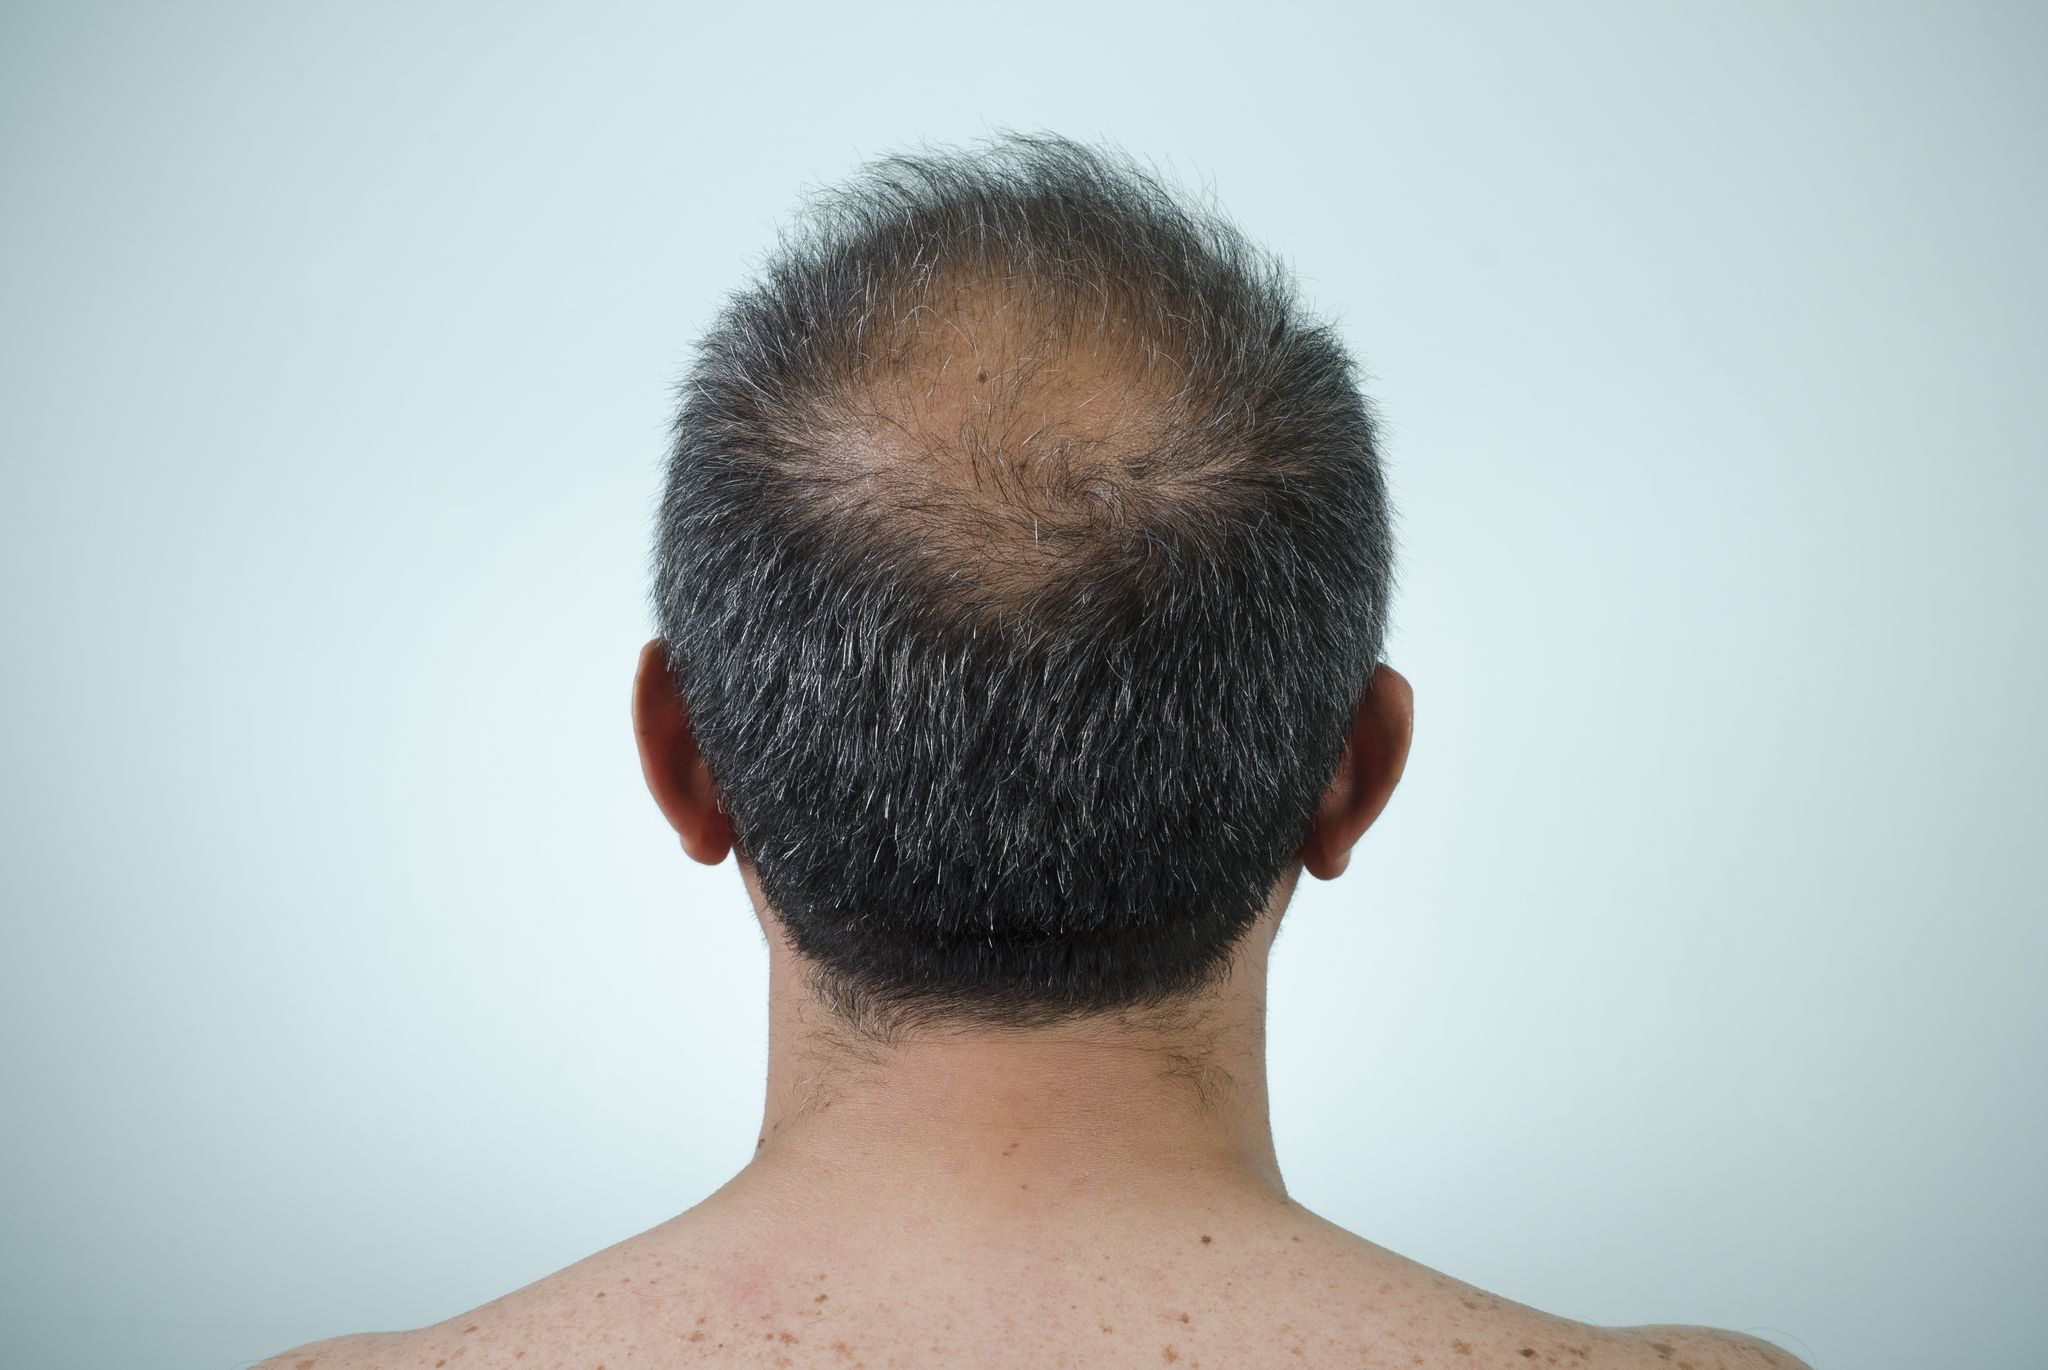 https://hips.hearstapps.com/hmg-prod/images/the-back-view-of-a-mans-head-who-is-balding-royalty-free-image-184378269-1547650617.jpg?crop=0.990xw:1.00xh;0.00518xw,0&resize=2048:*